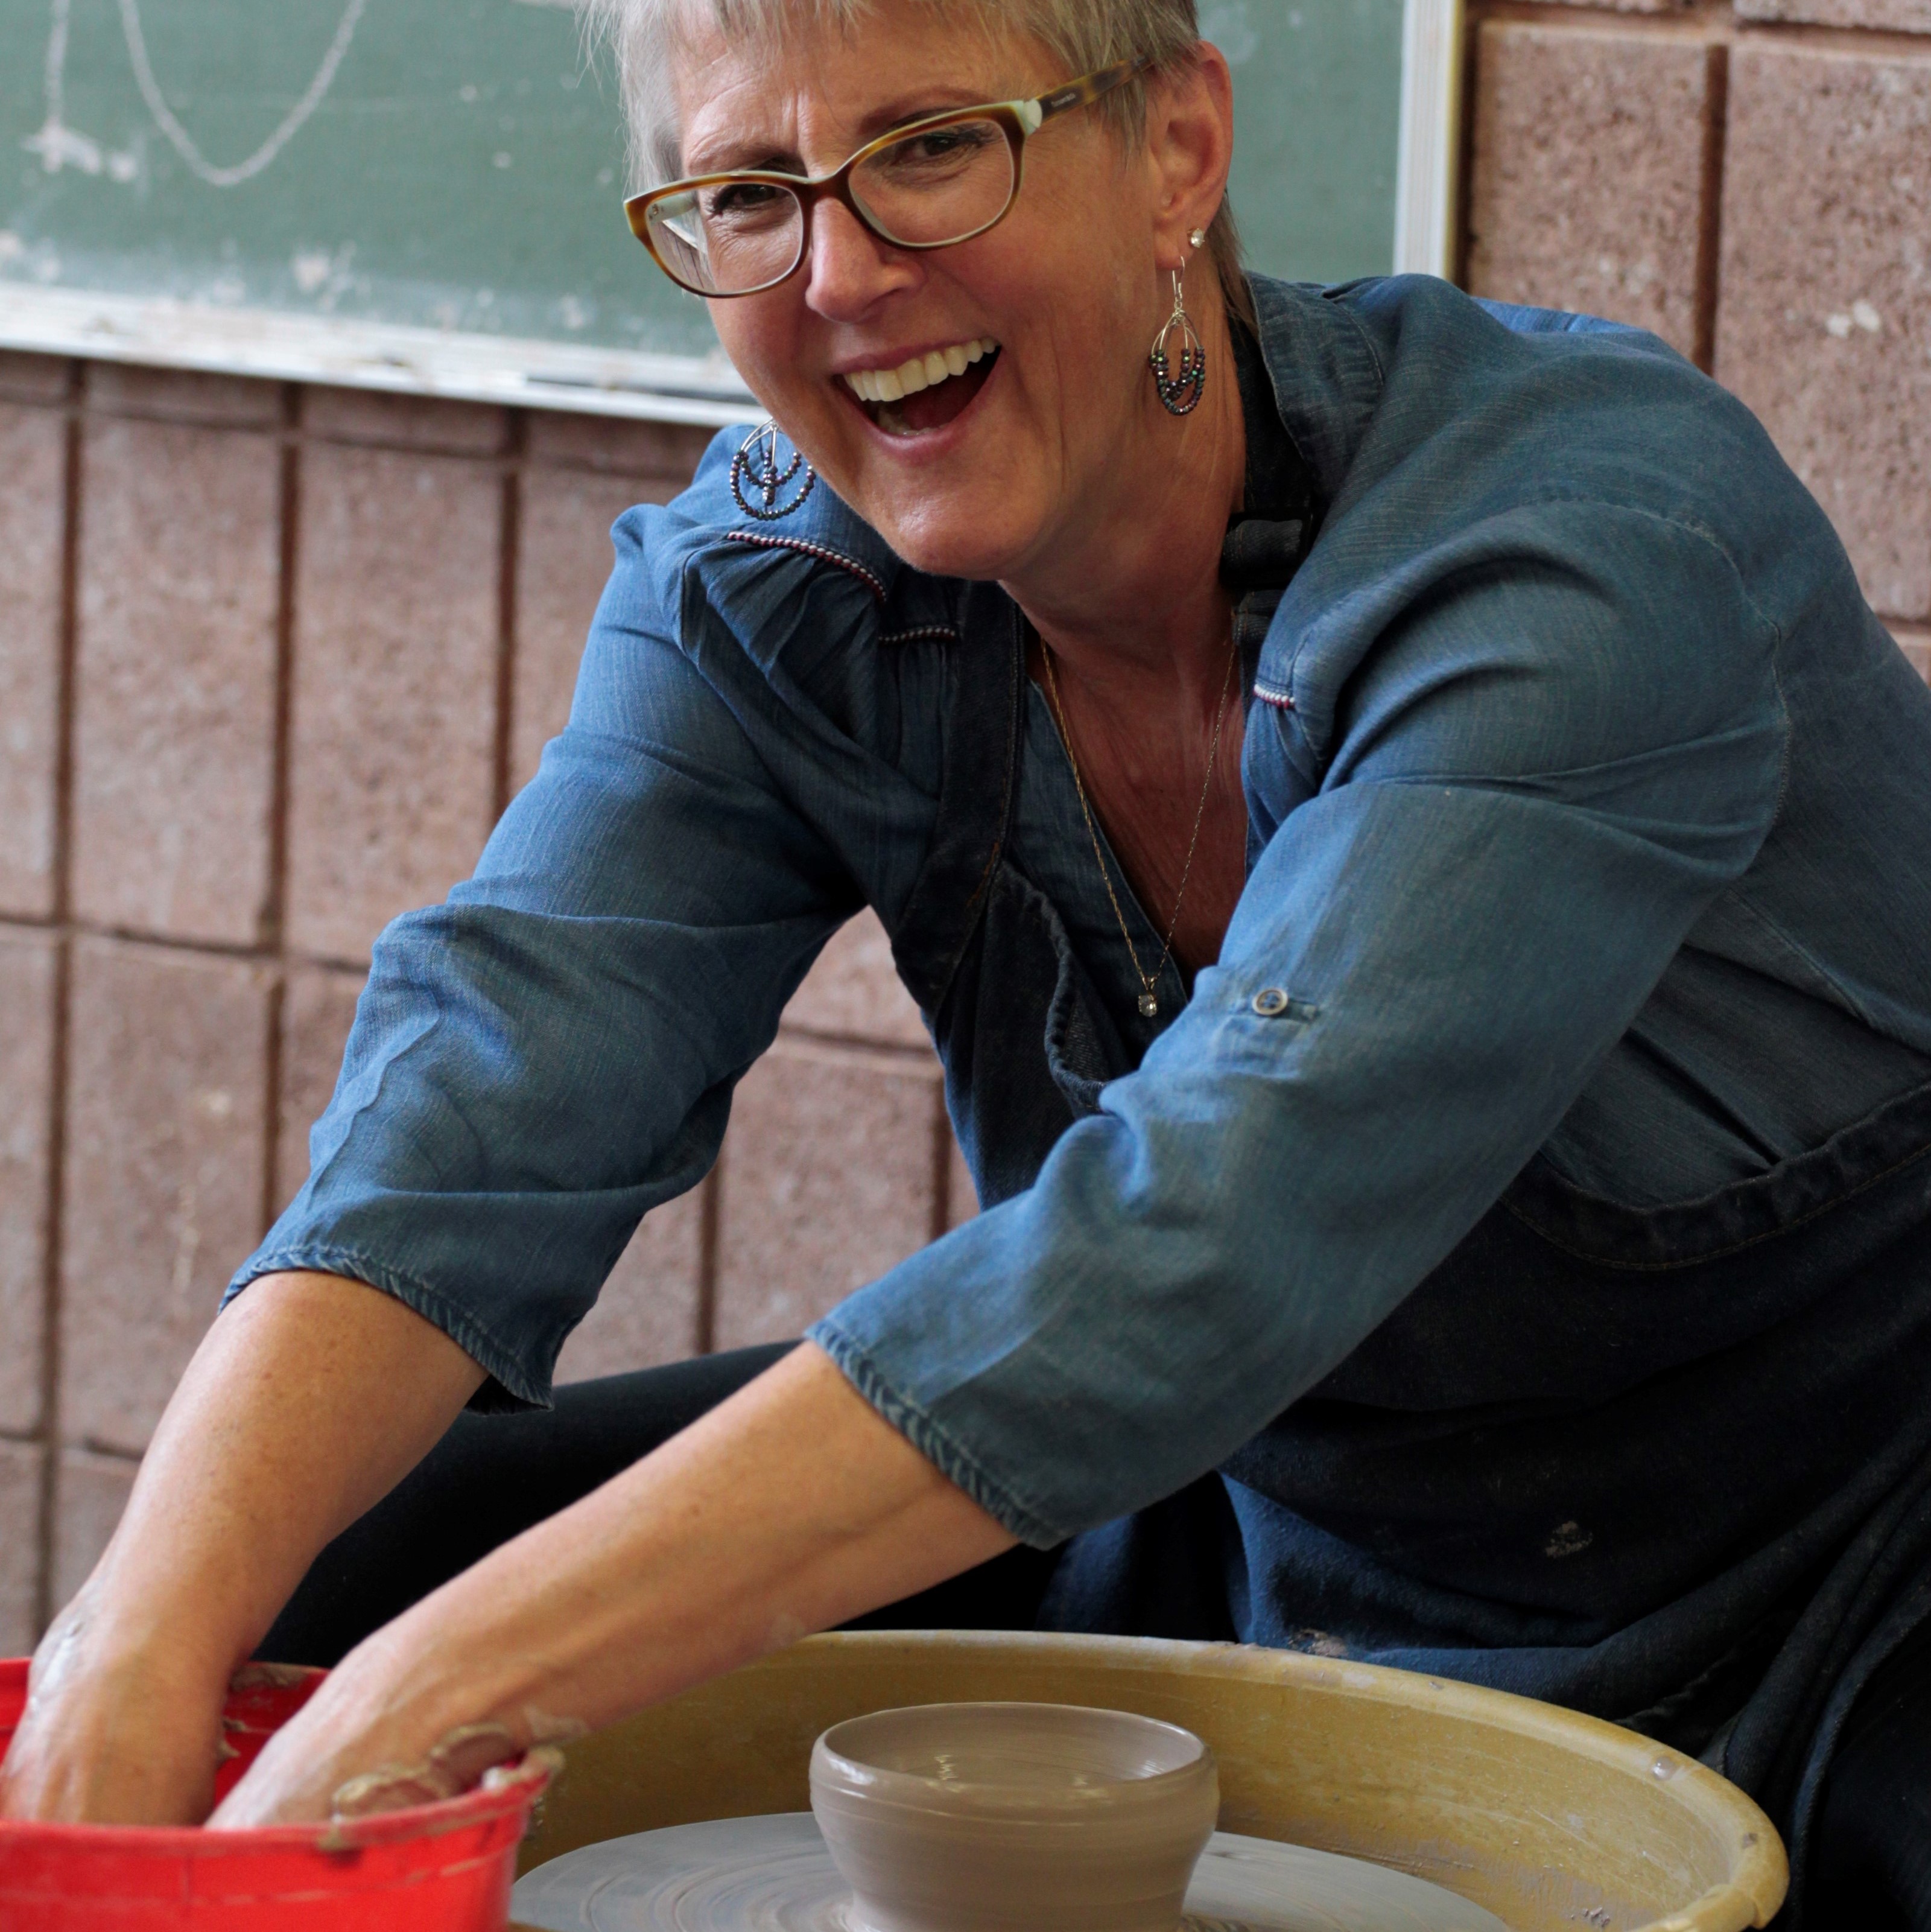 A woman laughs while working with wet clay on a potter's wheel.